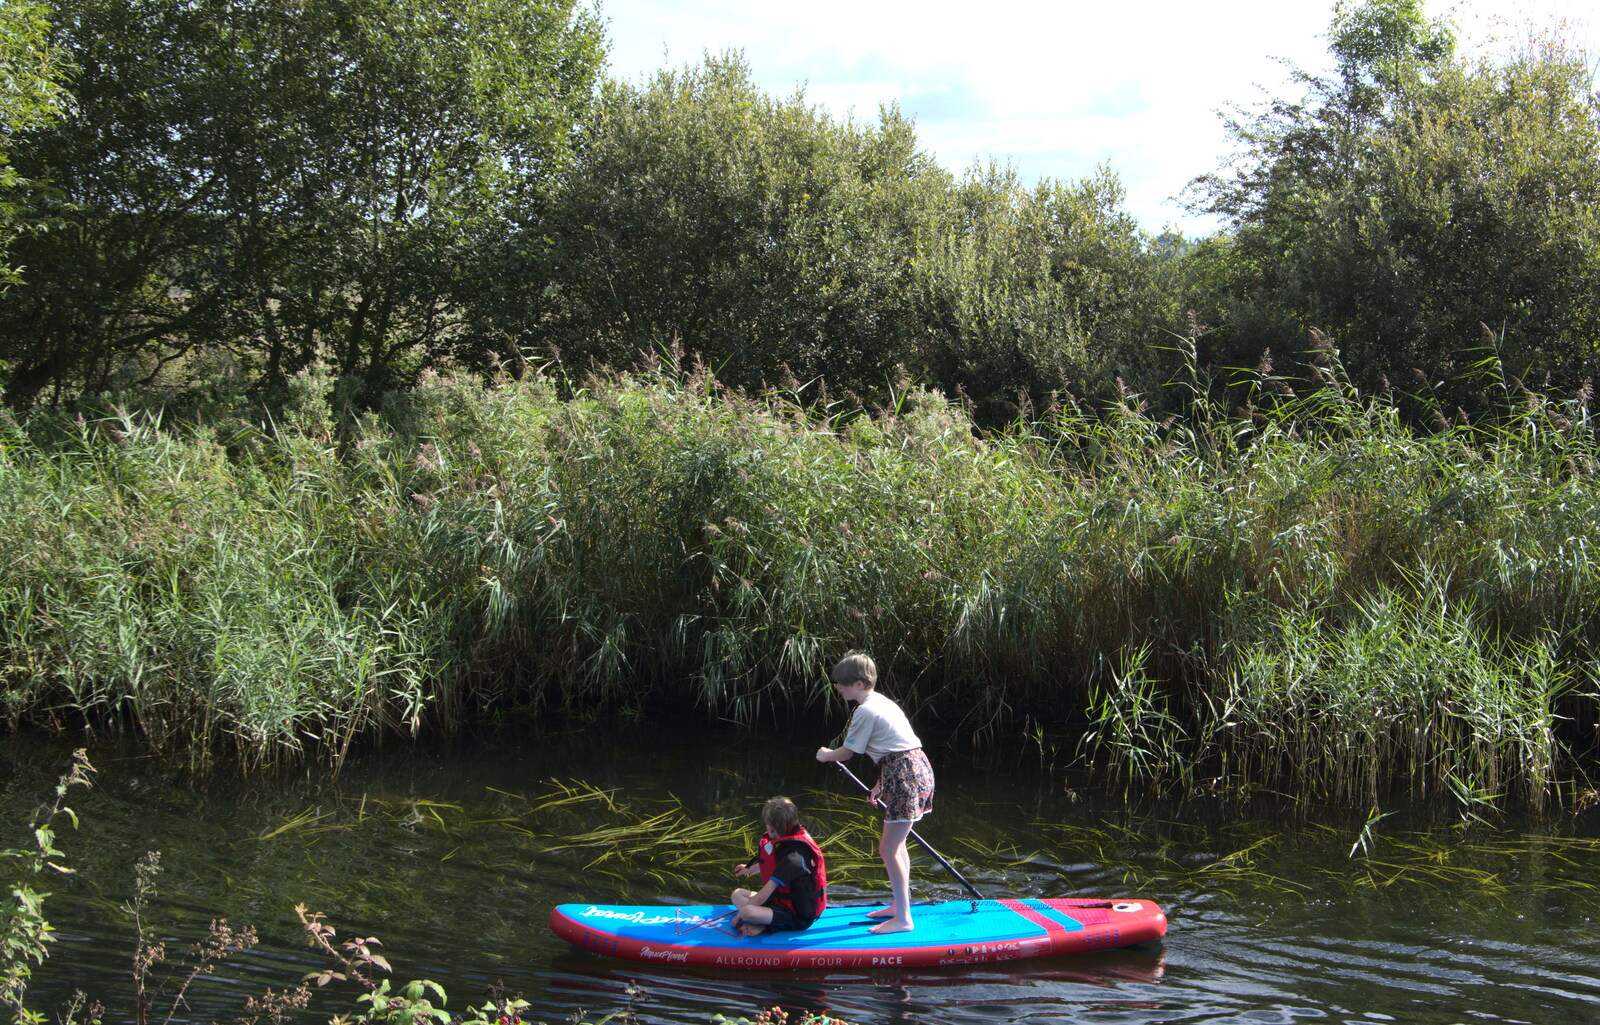 Camping at Three Rivers, Geldeston, Norfolk - 5th September 2020: Harry and Lydia are off out again